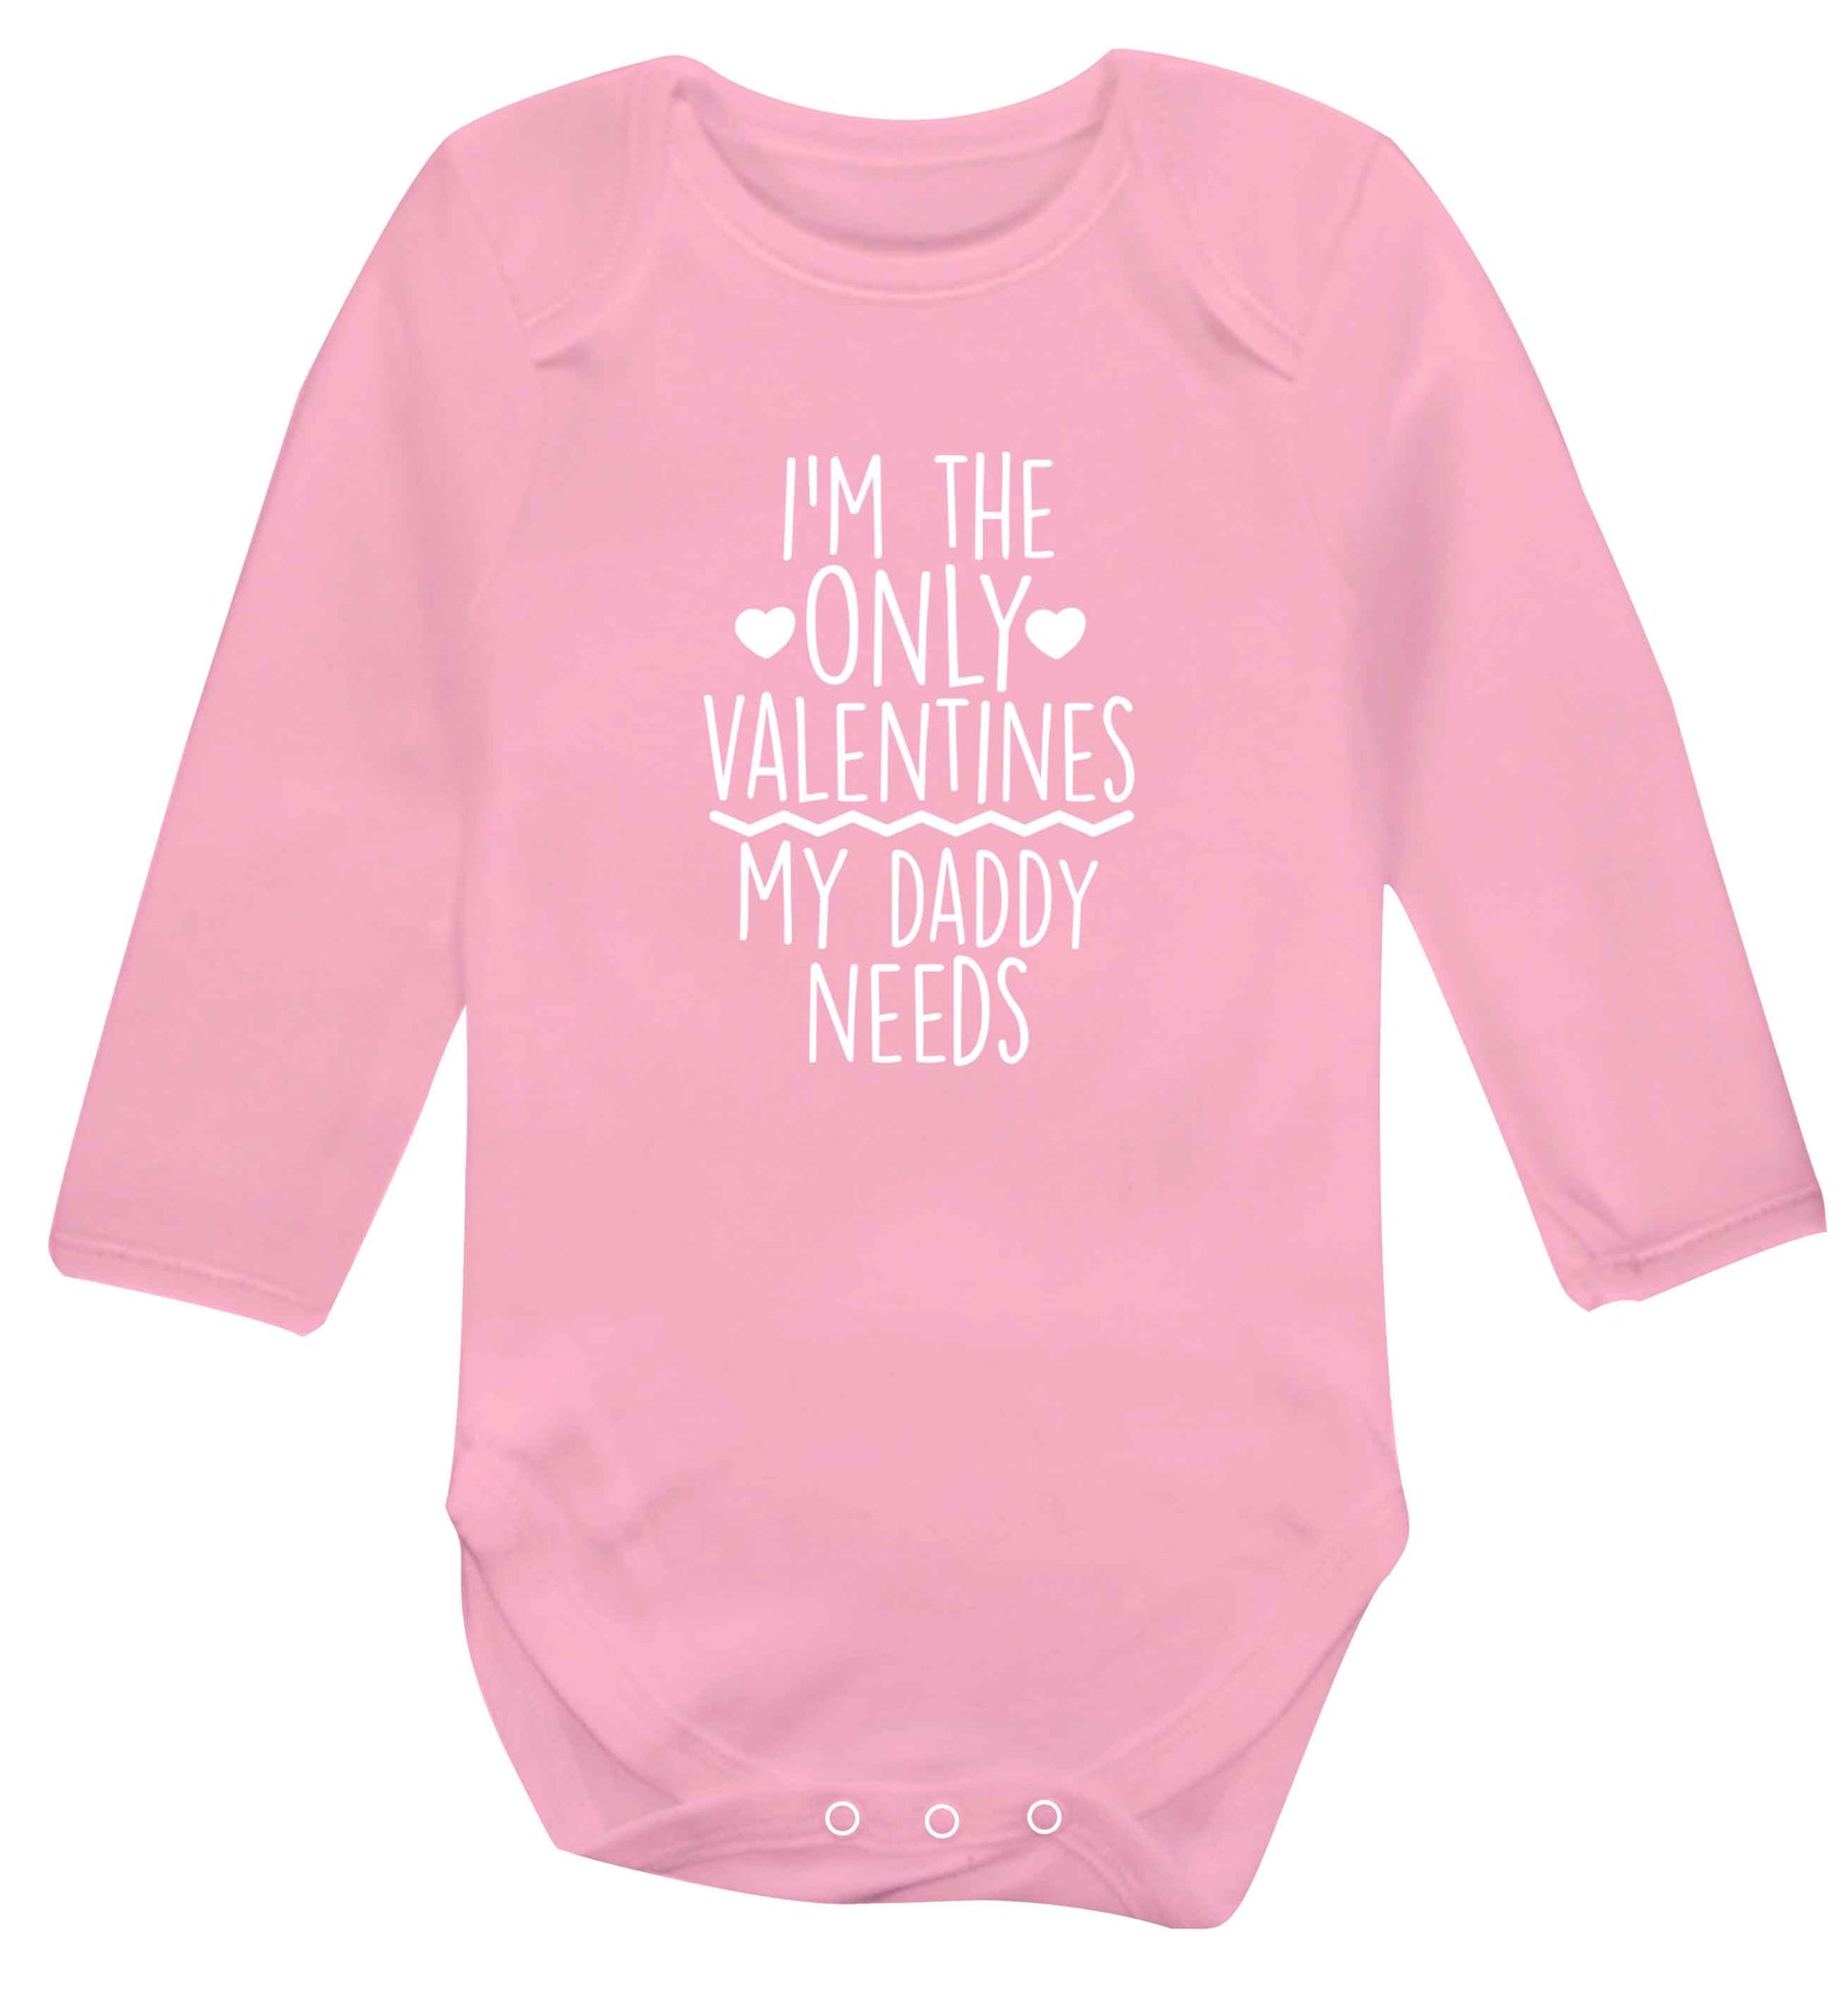 I'm the only valentines my daddy needs baby vest long sleeved pale pink 6-12 months